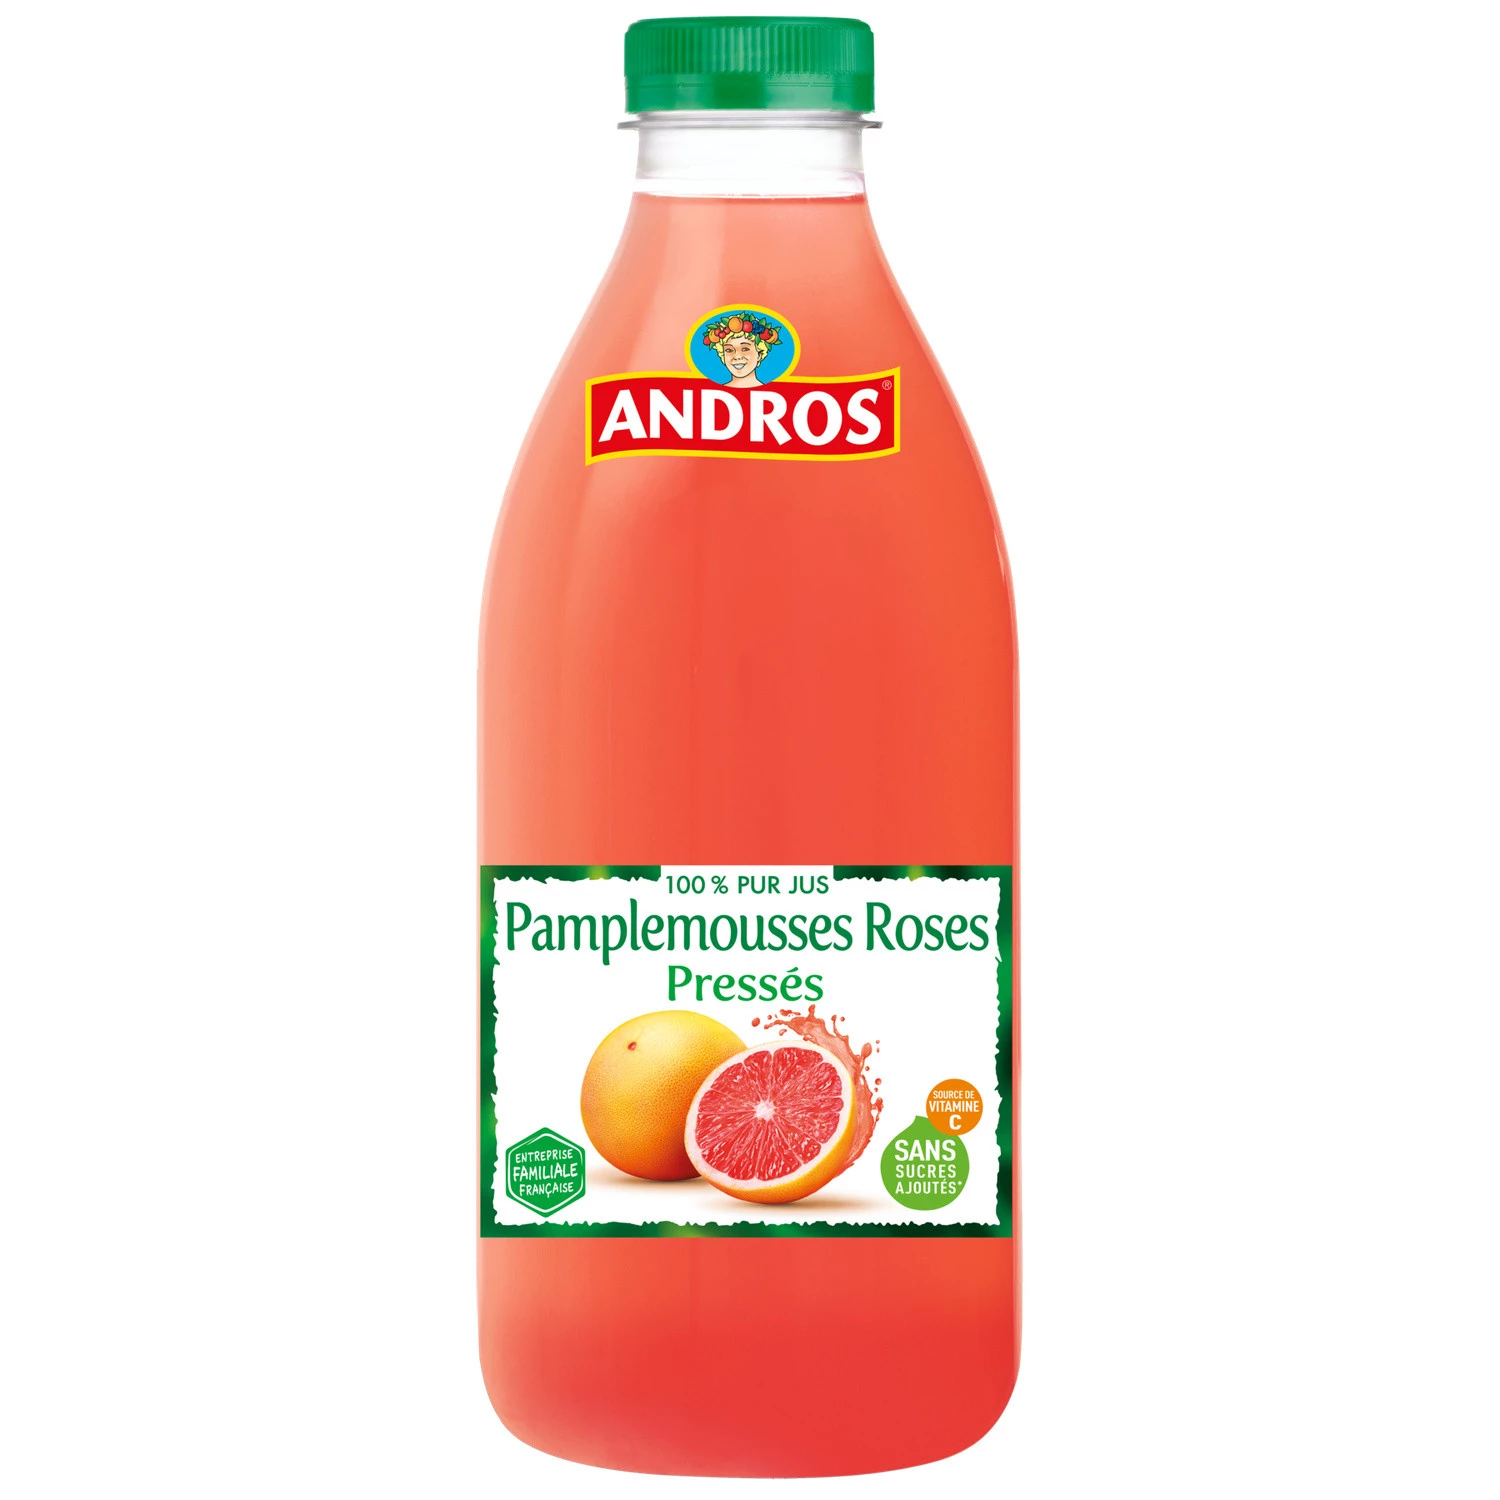 Andros Squeezed Pink Grapefruit juice 1L